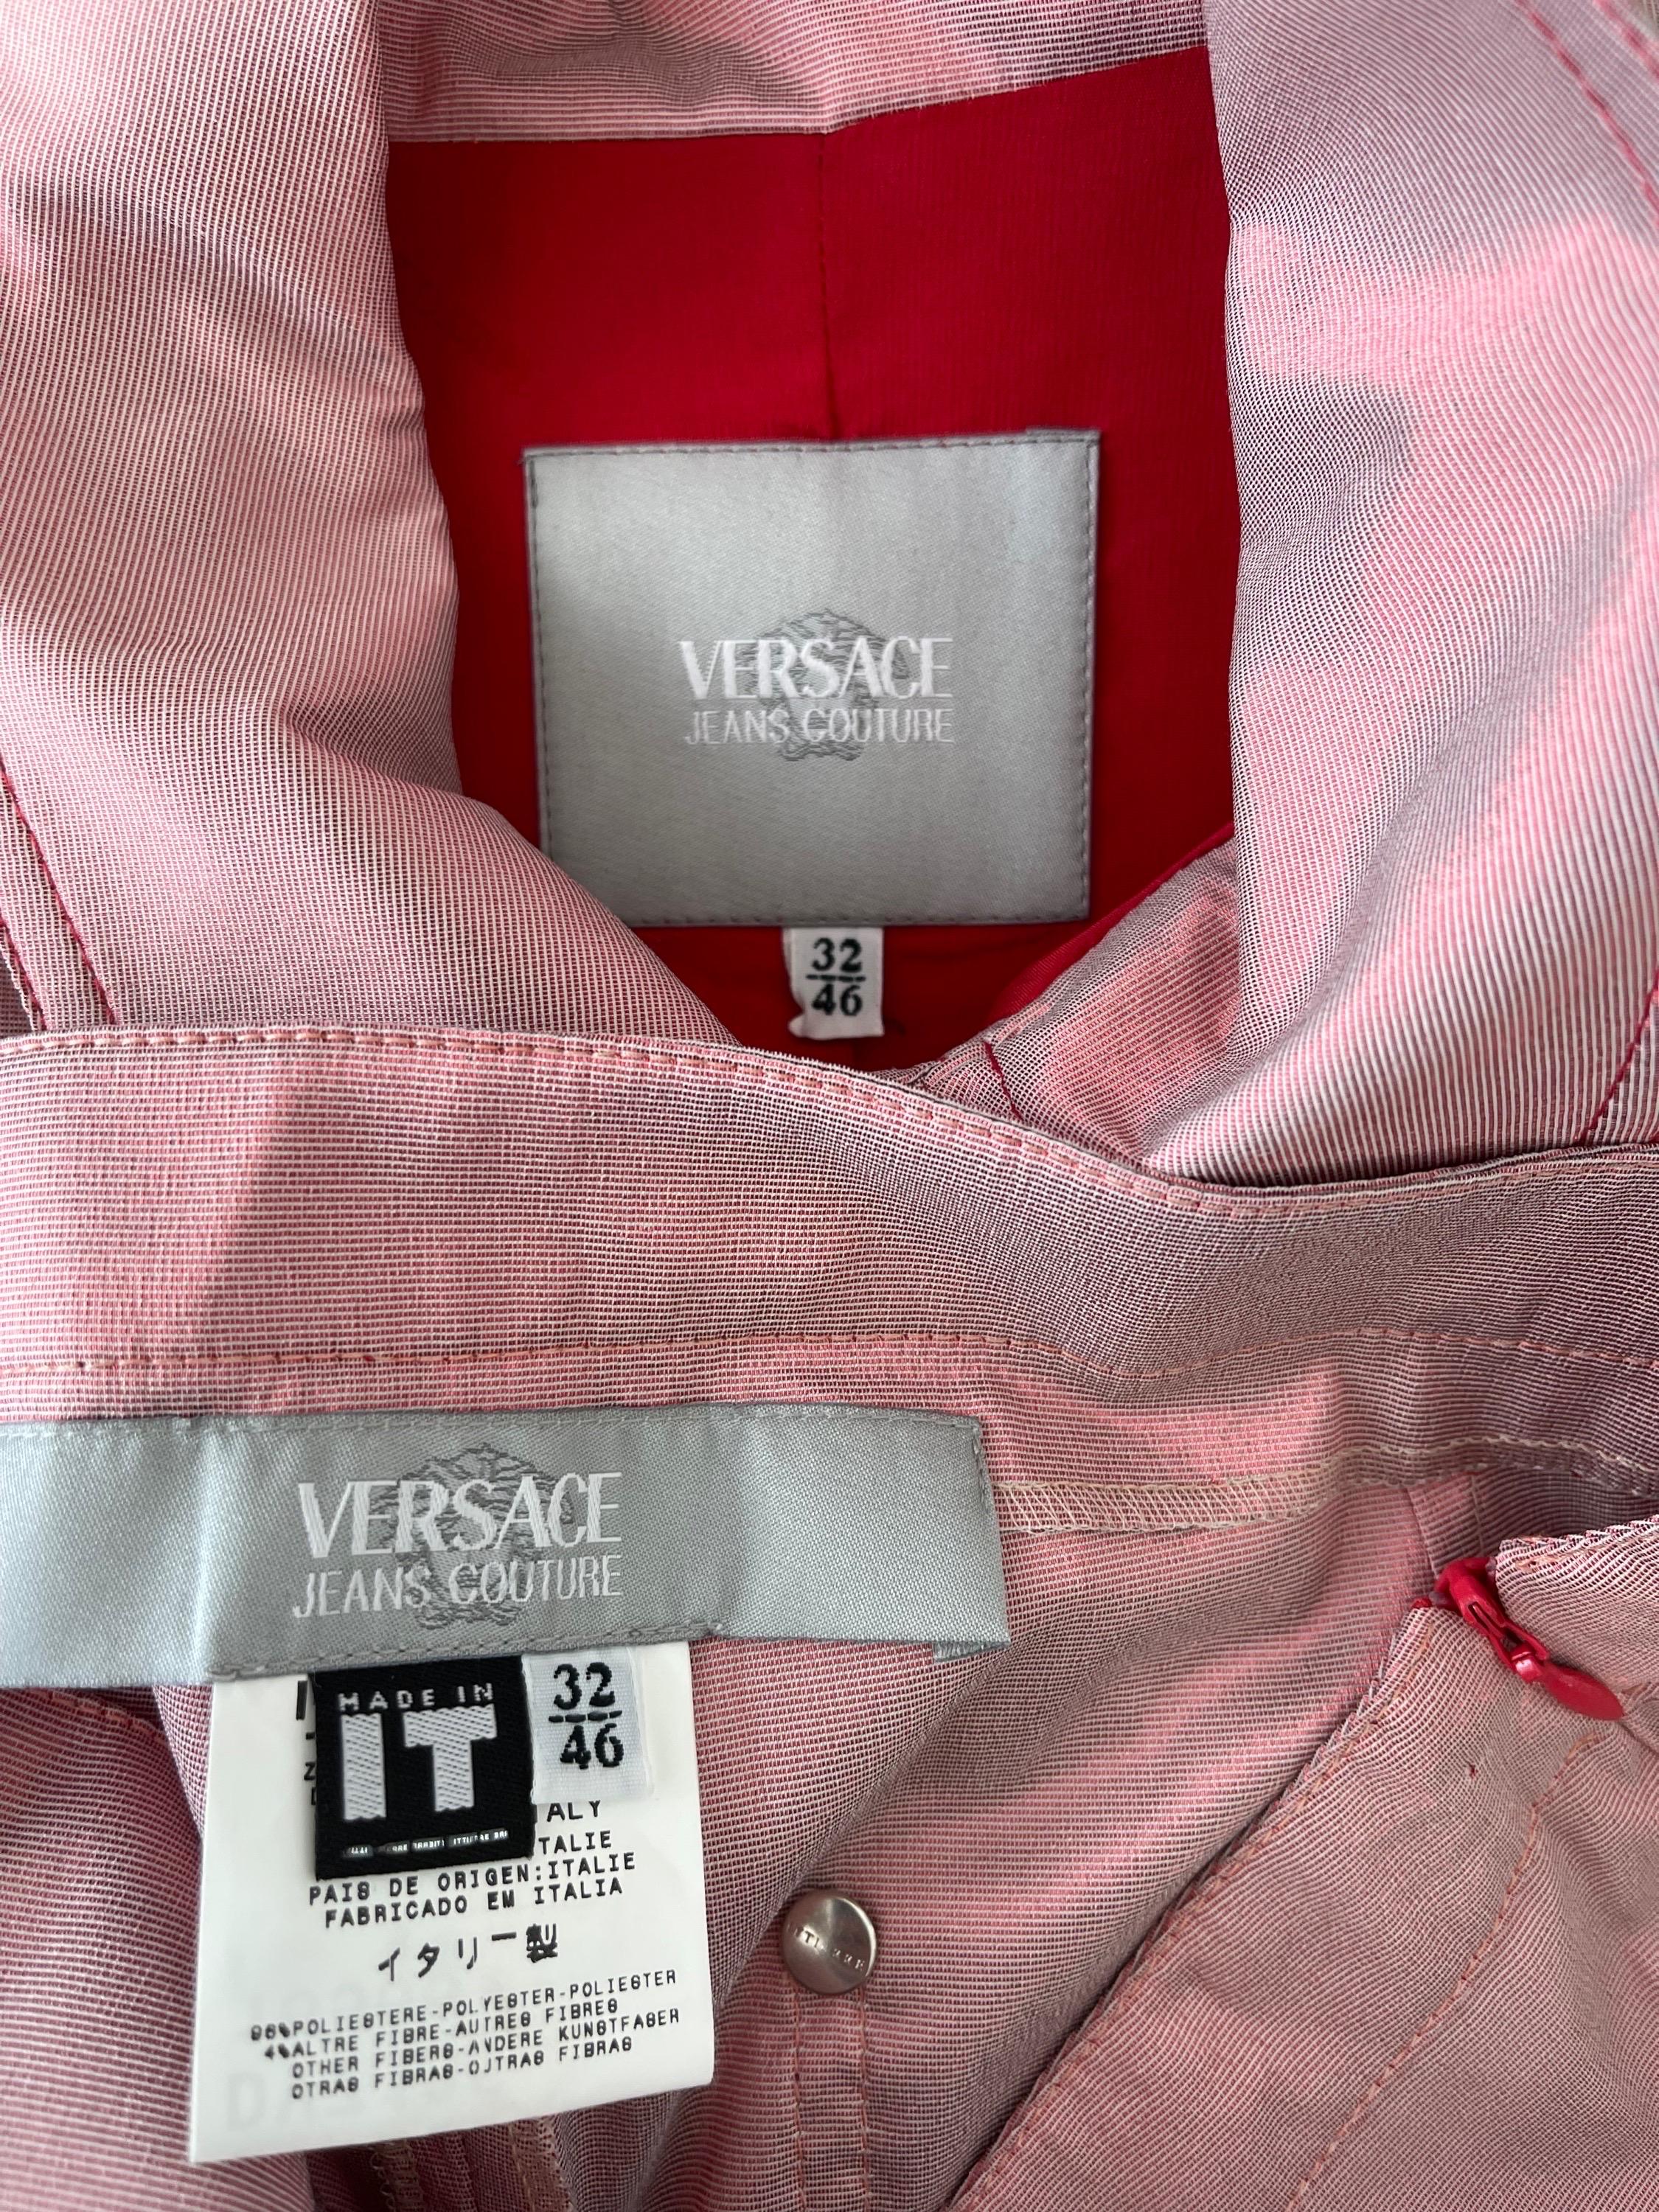 Amazing and rare 1990s GIANNI VERSACE JEANS COUTURE pink and red iridescent jacket and capri pants ensemble ! Western style jacket wit stitching at each breast pocket. Attached let features red rhinestone encrusted buckle. Silver logo encrusted